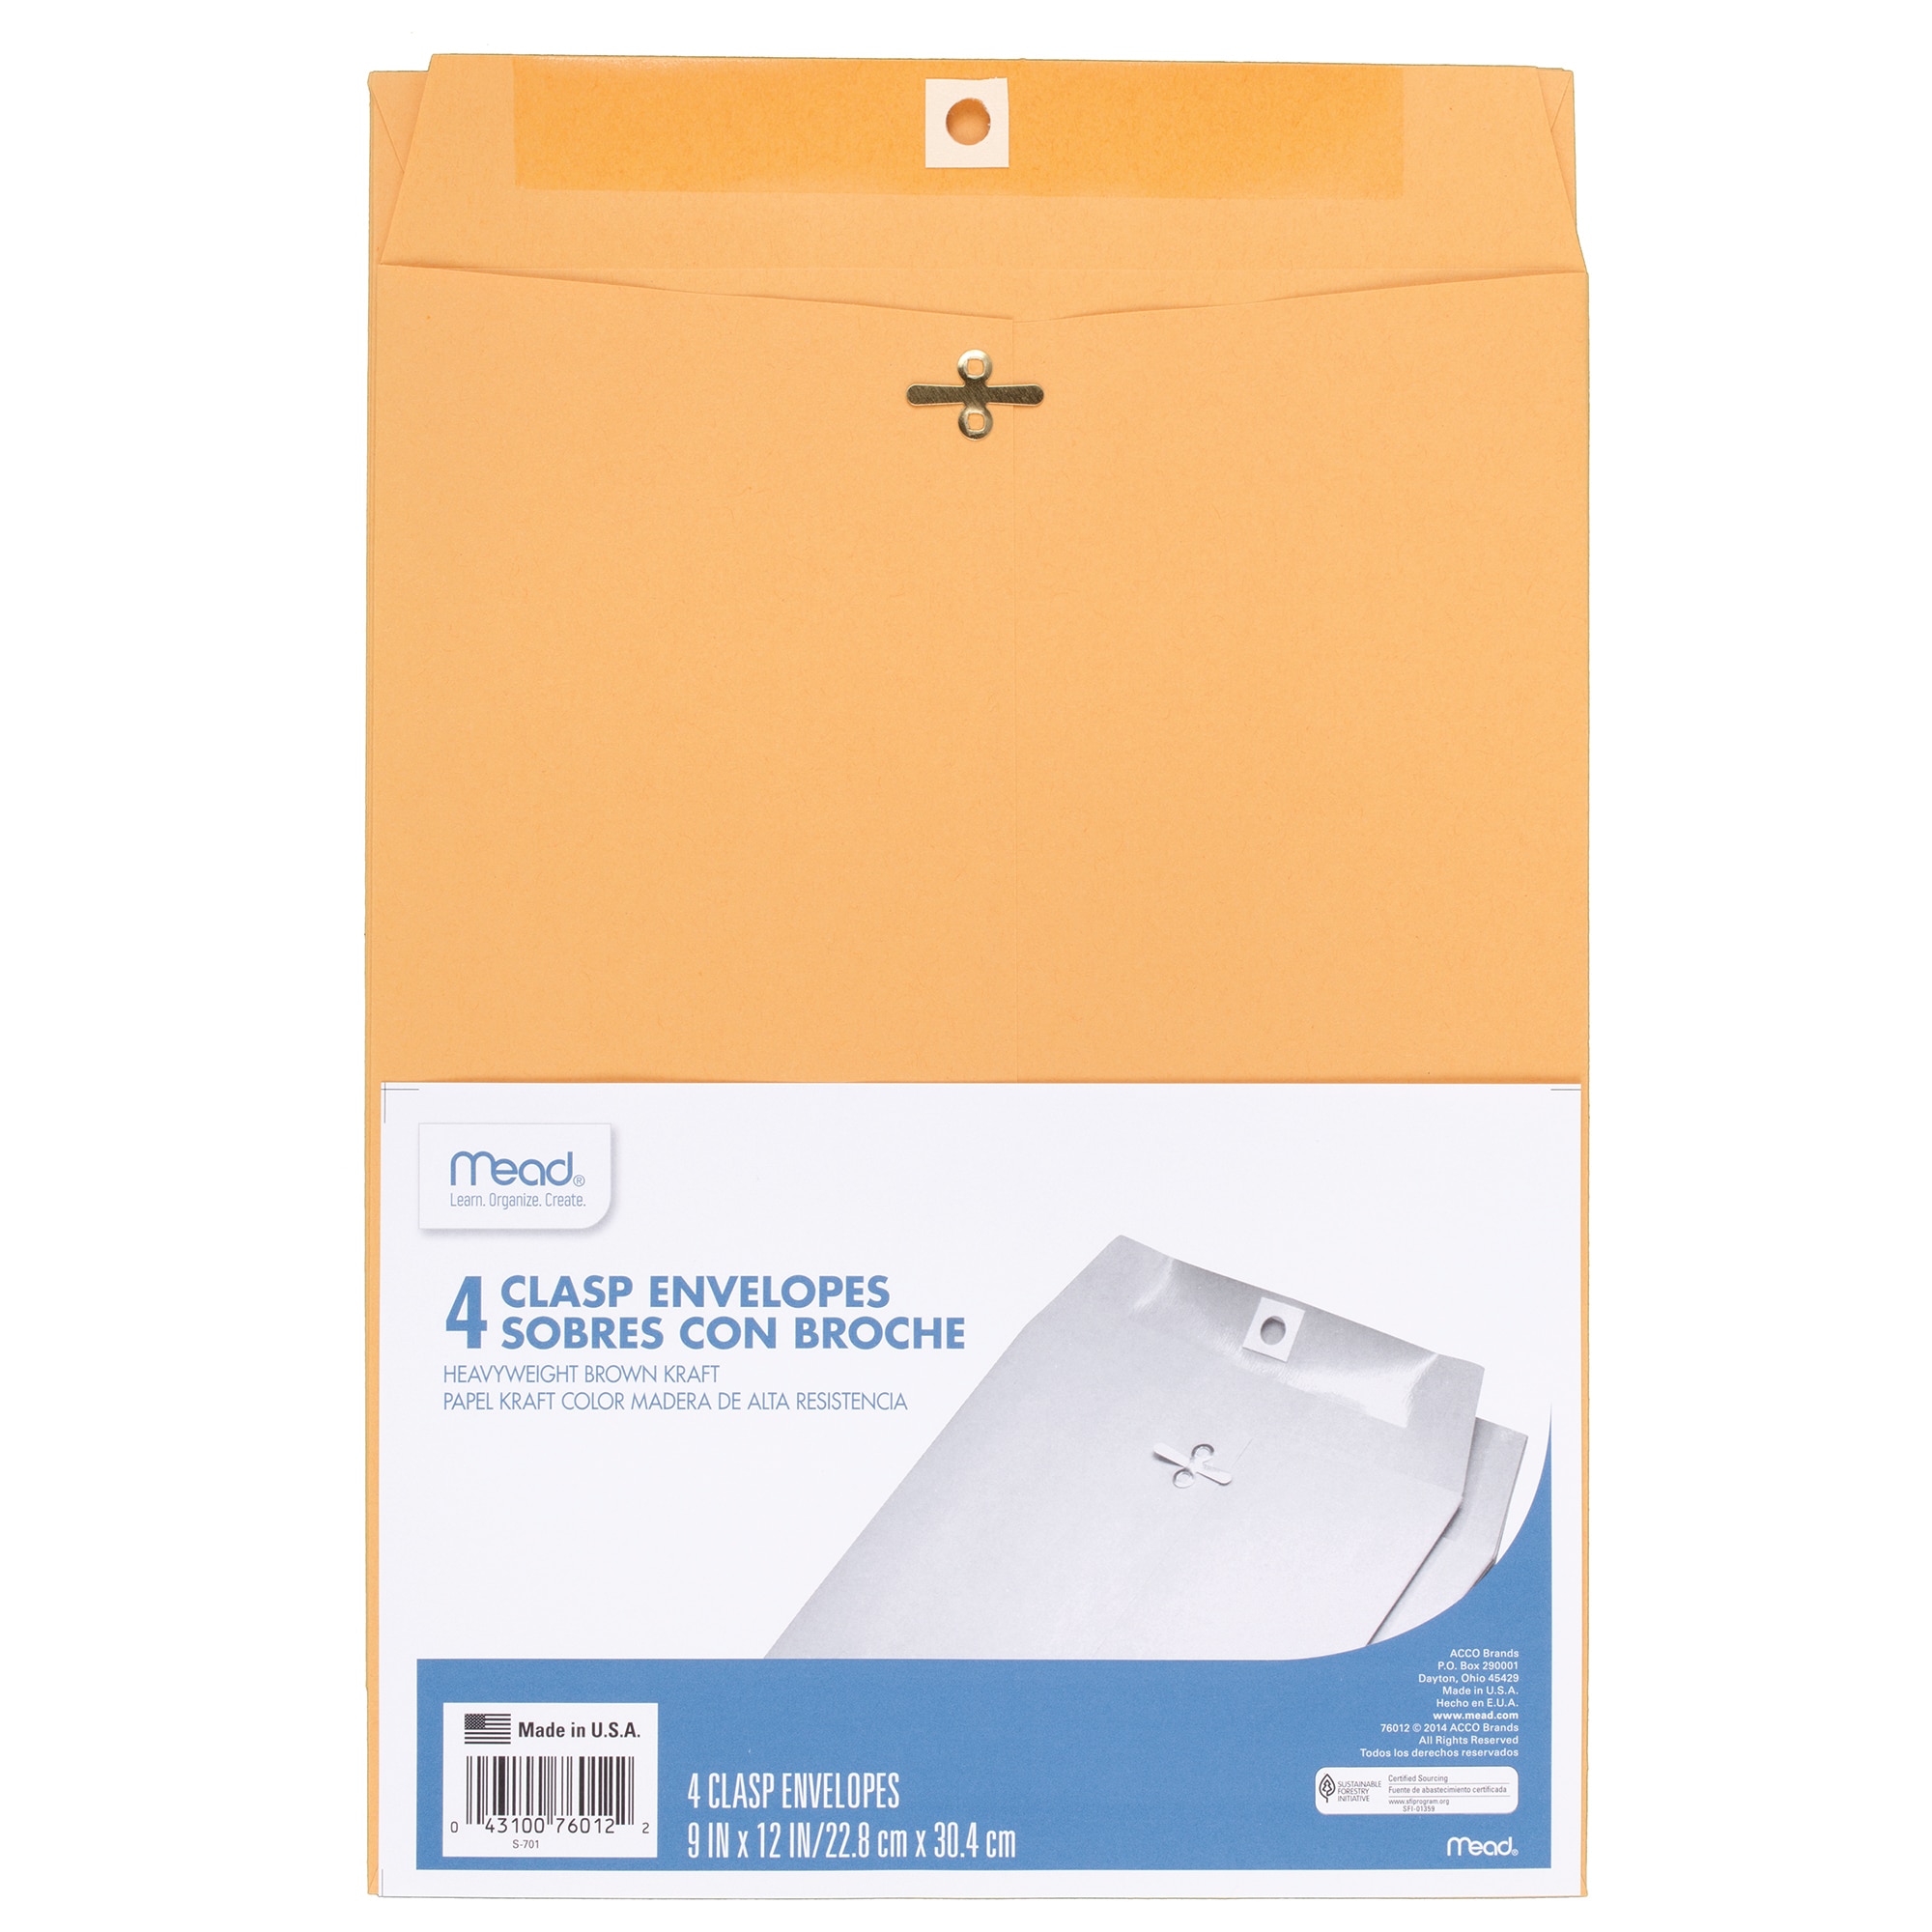 Mead Clasp Envelopes, 9" x 12", Brown Kraft, 4 Count